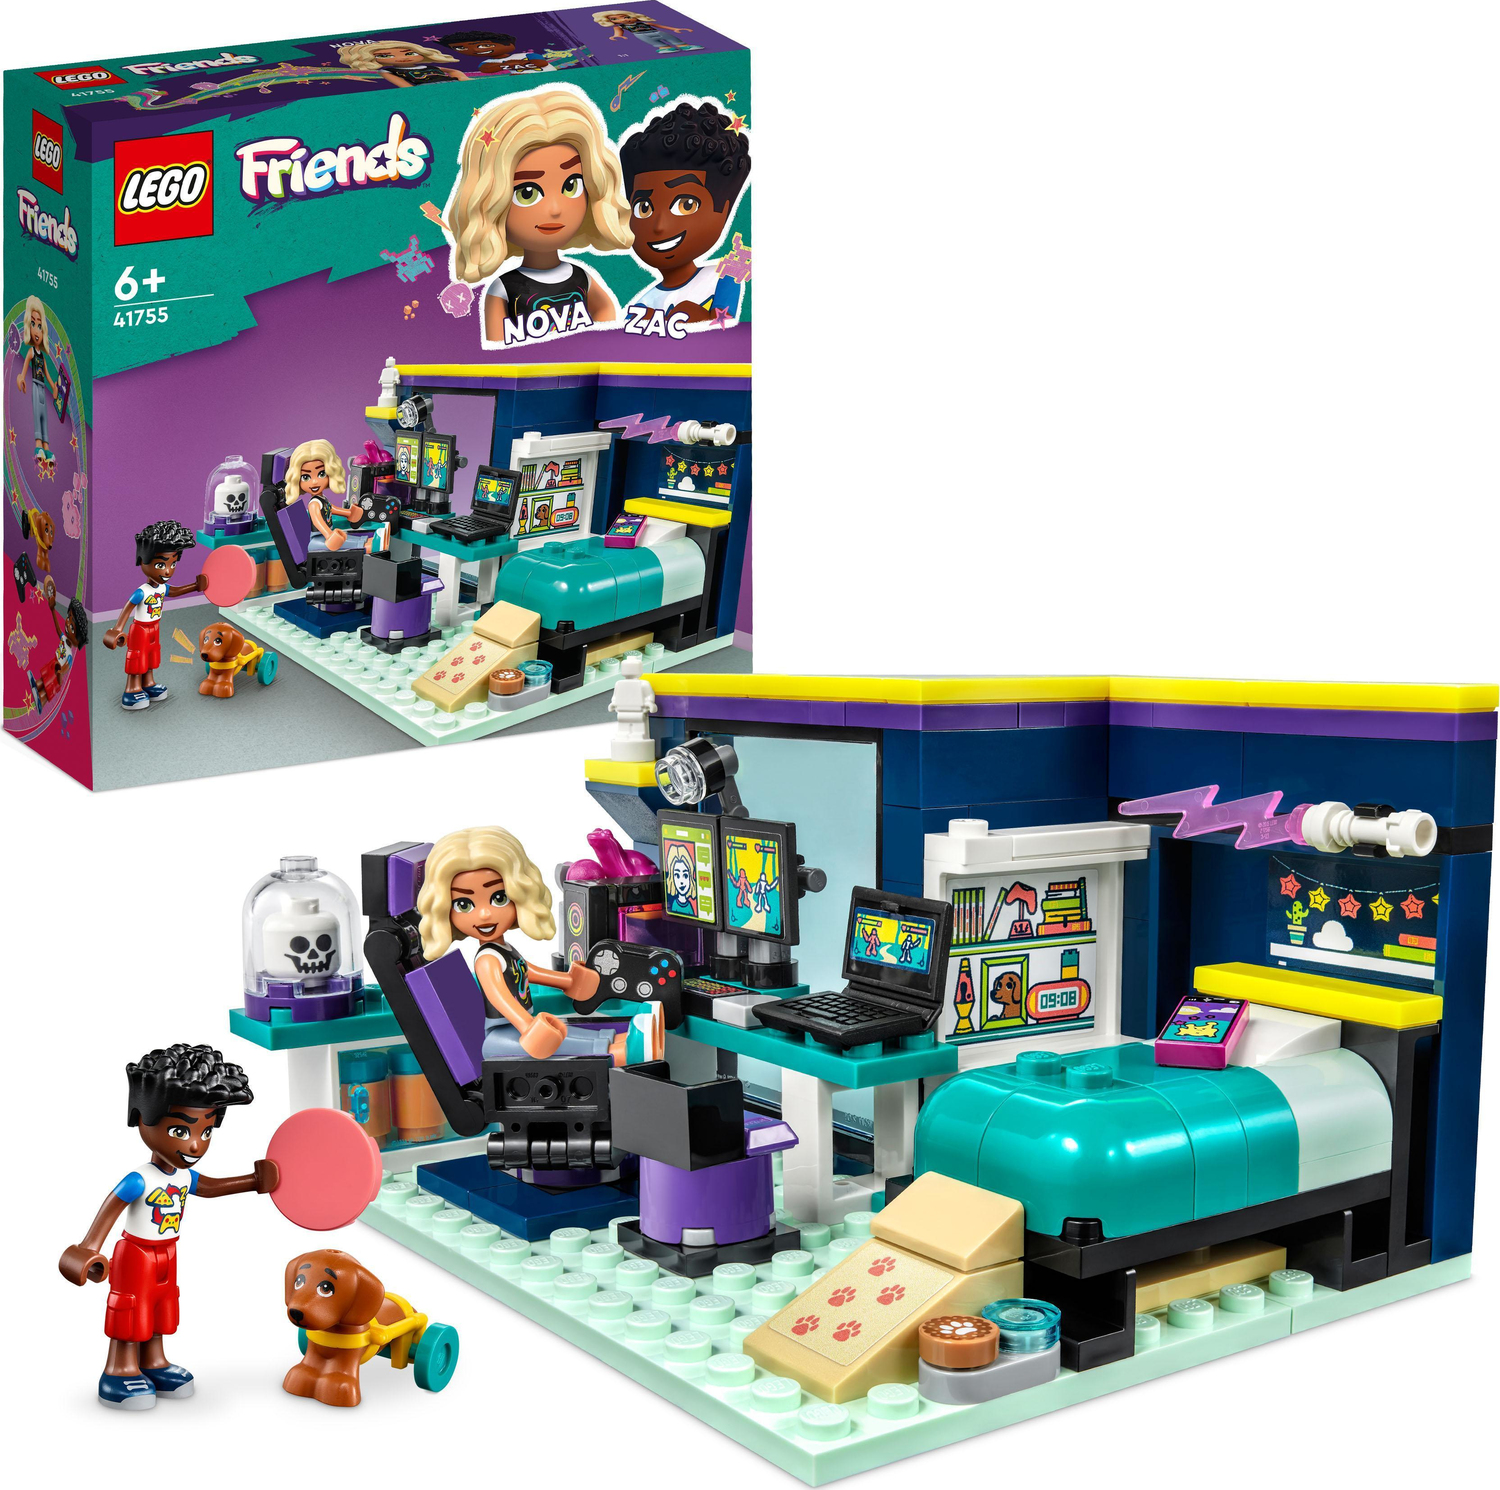 optager Pickering aftale Lego Friends 41755 Nova's Room - Teaching Toys and Books